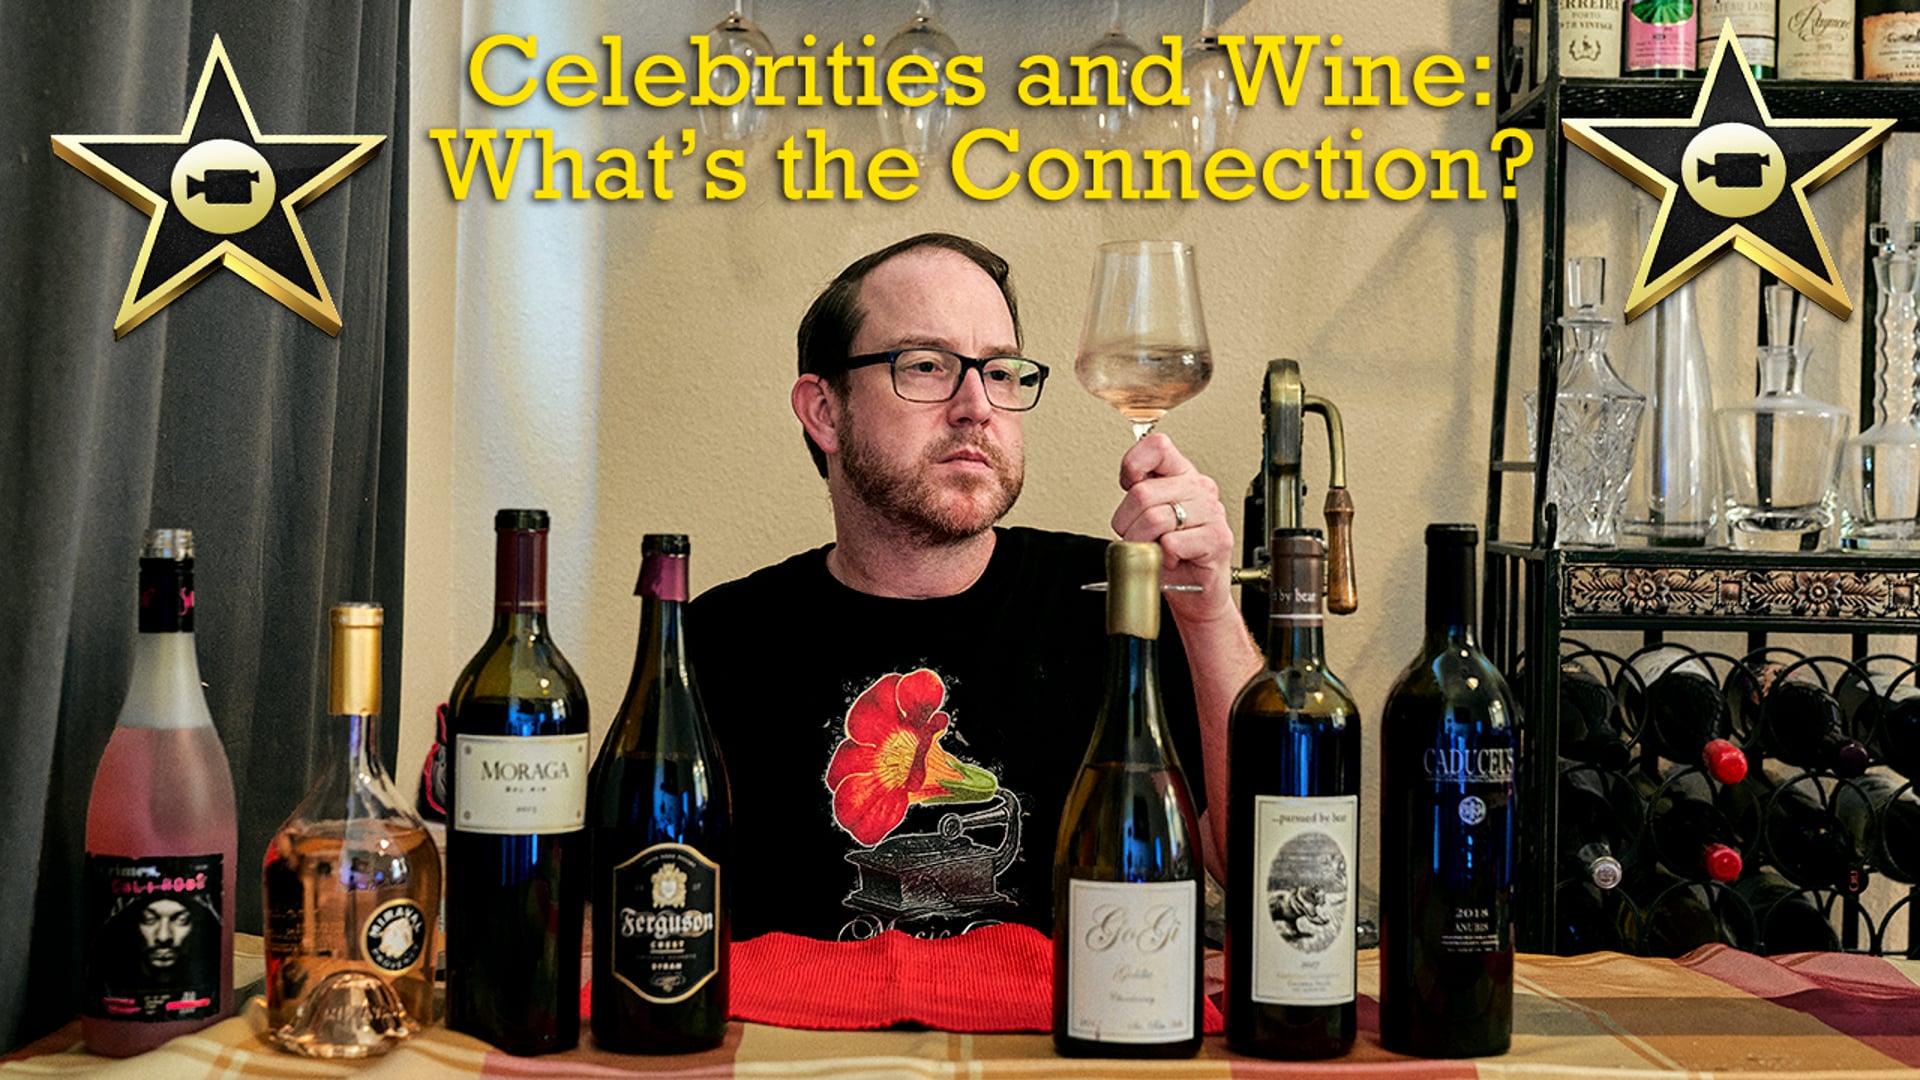 Watch Celebrities and Wine: What's the Connection? on our Free Roku Channel